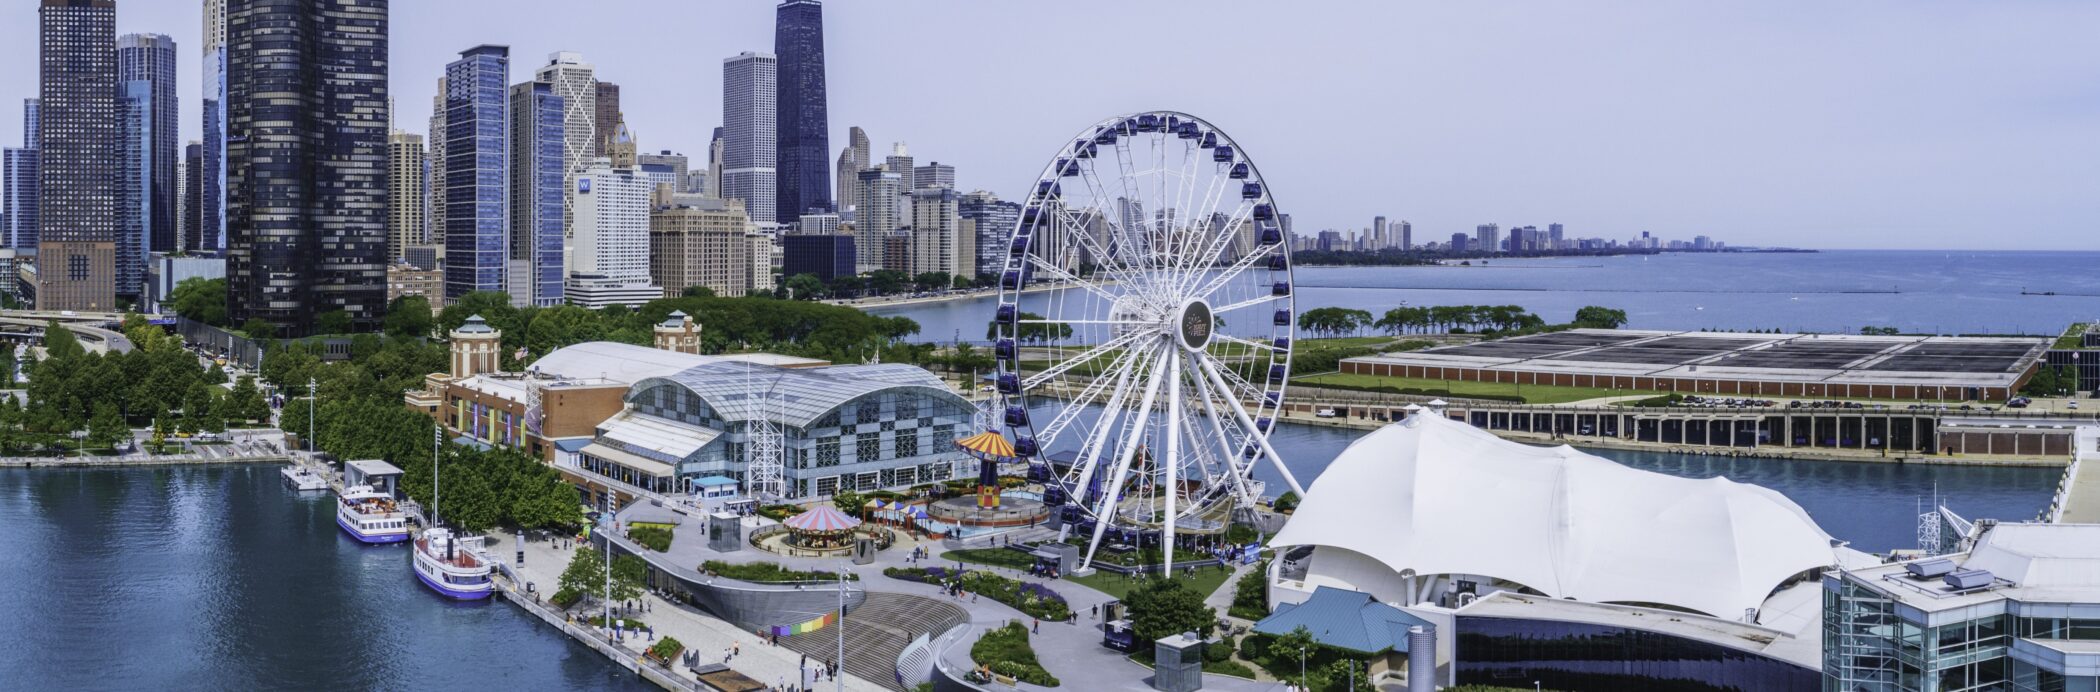 Aerial View of Navy Pier During the Day